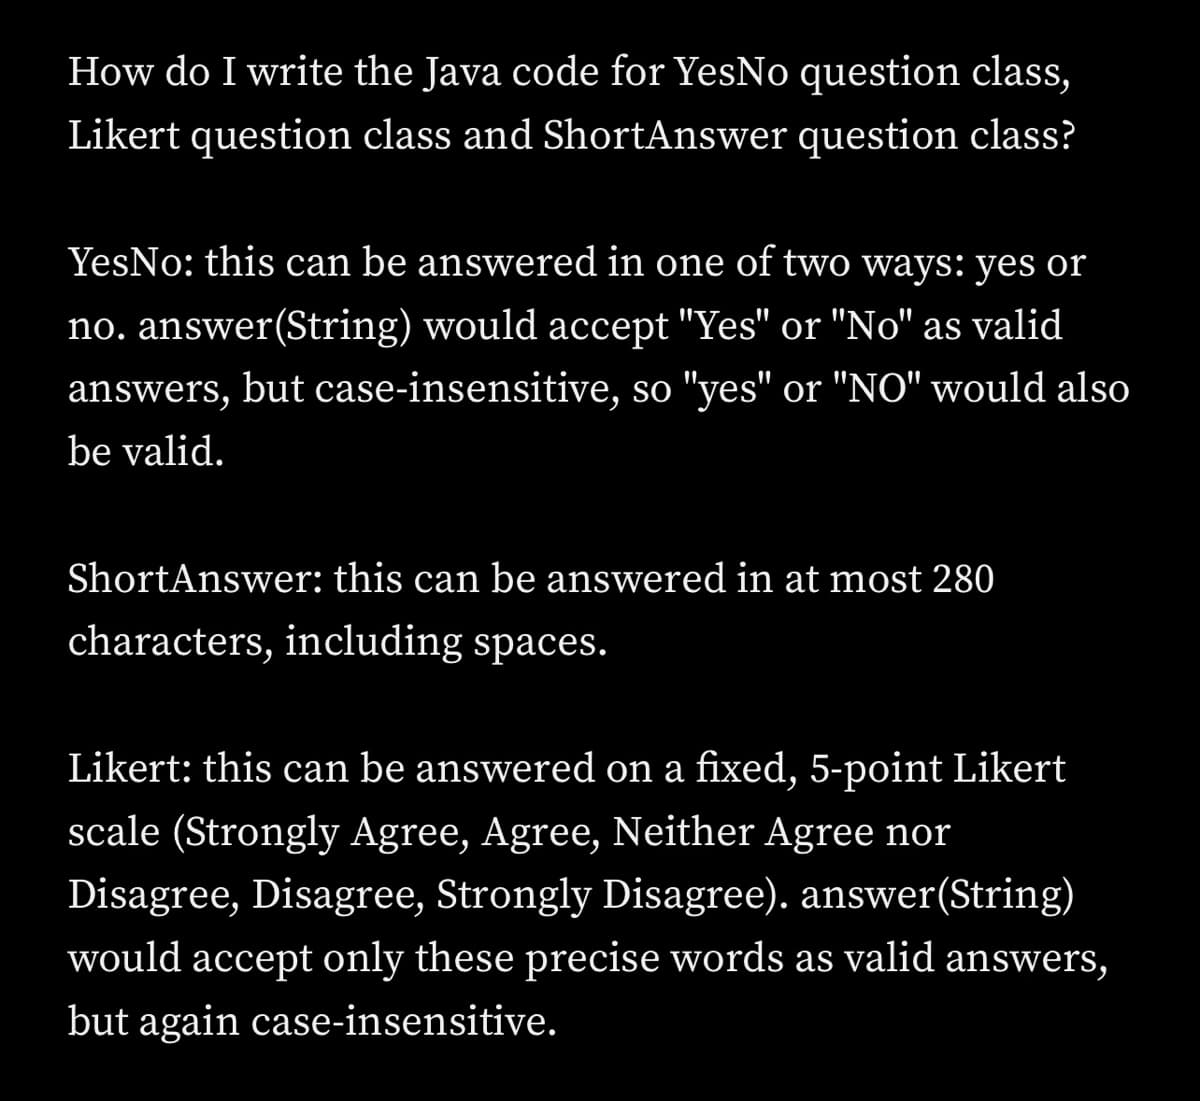 How do I write the Java code for YesNo question class,
Likert question class and ShortAnswer question class?
YesNo: this can be answered in one of two ways: yes or
no. answer(String) would accept "Yes" or "No" as valid
answers, but case-insensitive, so "yes" or "NO" would also
be valid.
ShortAnswer: this can be answered in at most 280
characters, including spaces.
Likert: this can be answered on a fixed, 5-point Likert
scale (Strongly Agree, Agree, Neither Agree nor
Disagree, Disagree, Strongly Disagree). answer(String)
would accept only these precise words as valid answers,
but again case-insensitive.
